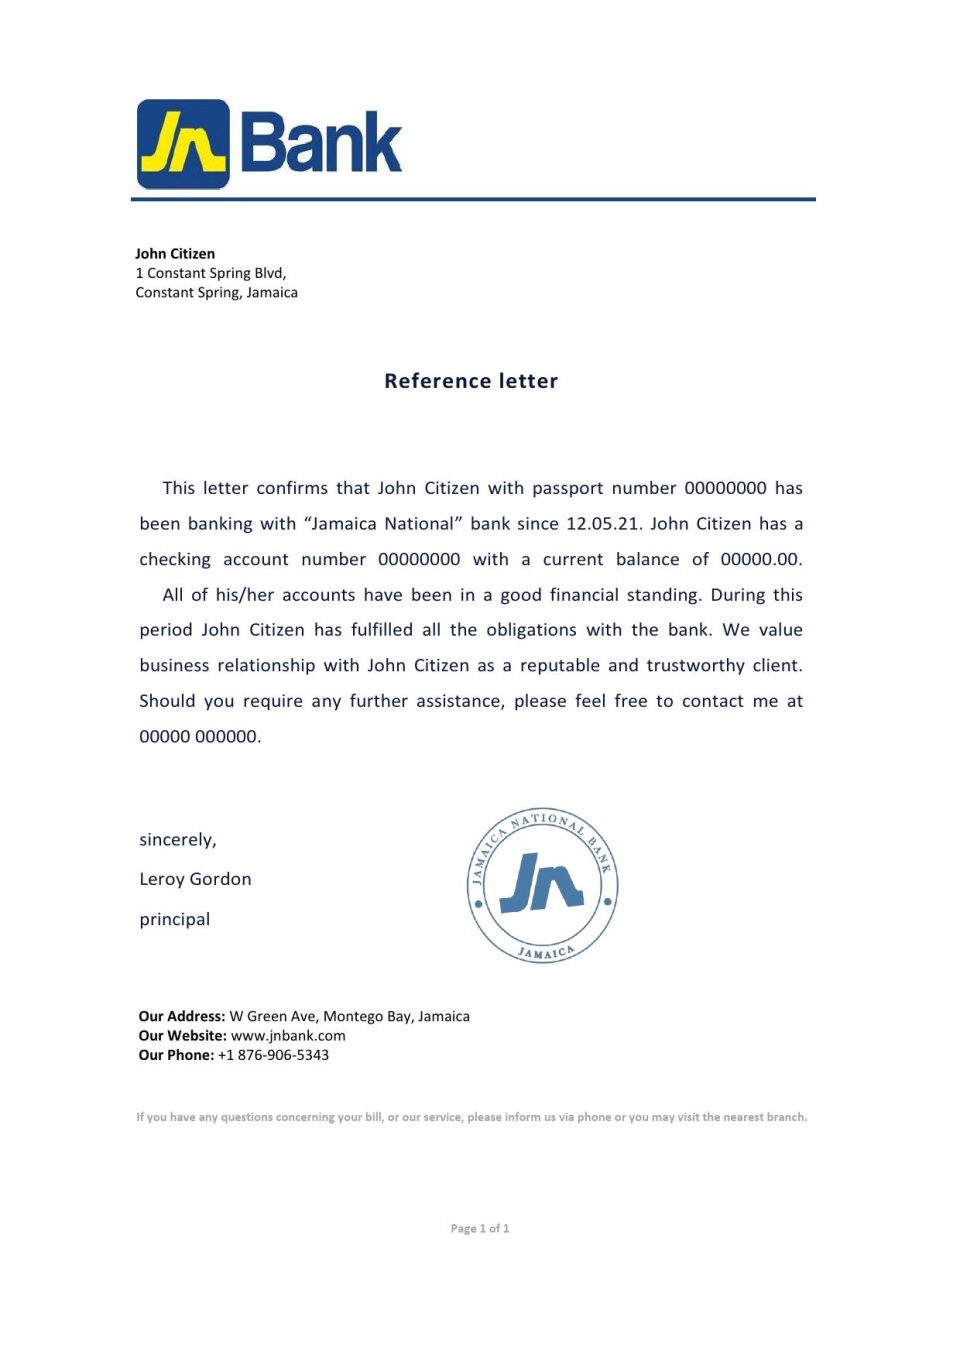 Download Jamaica National Bank Reference Letter Templates | Editable Word